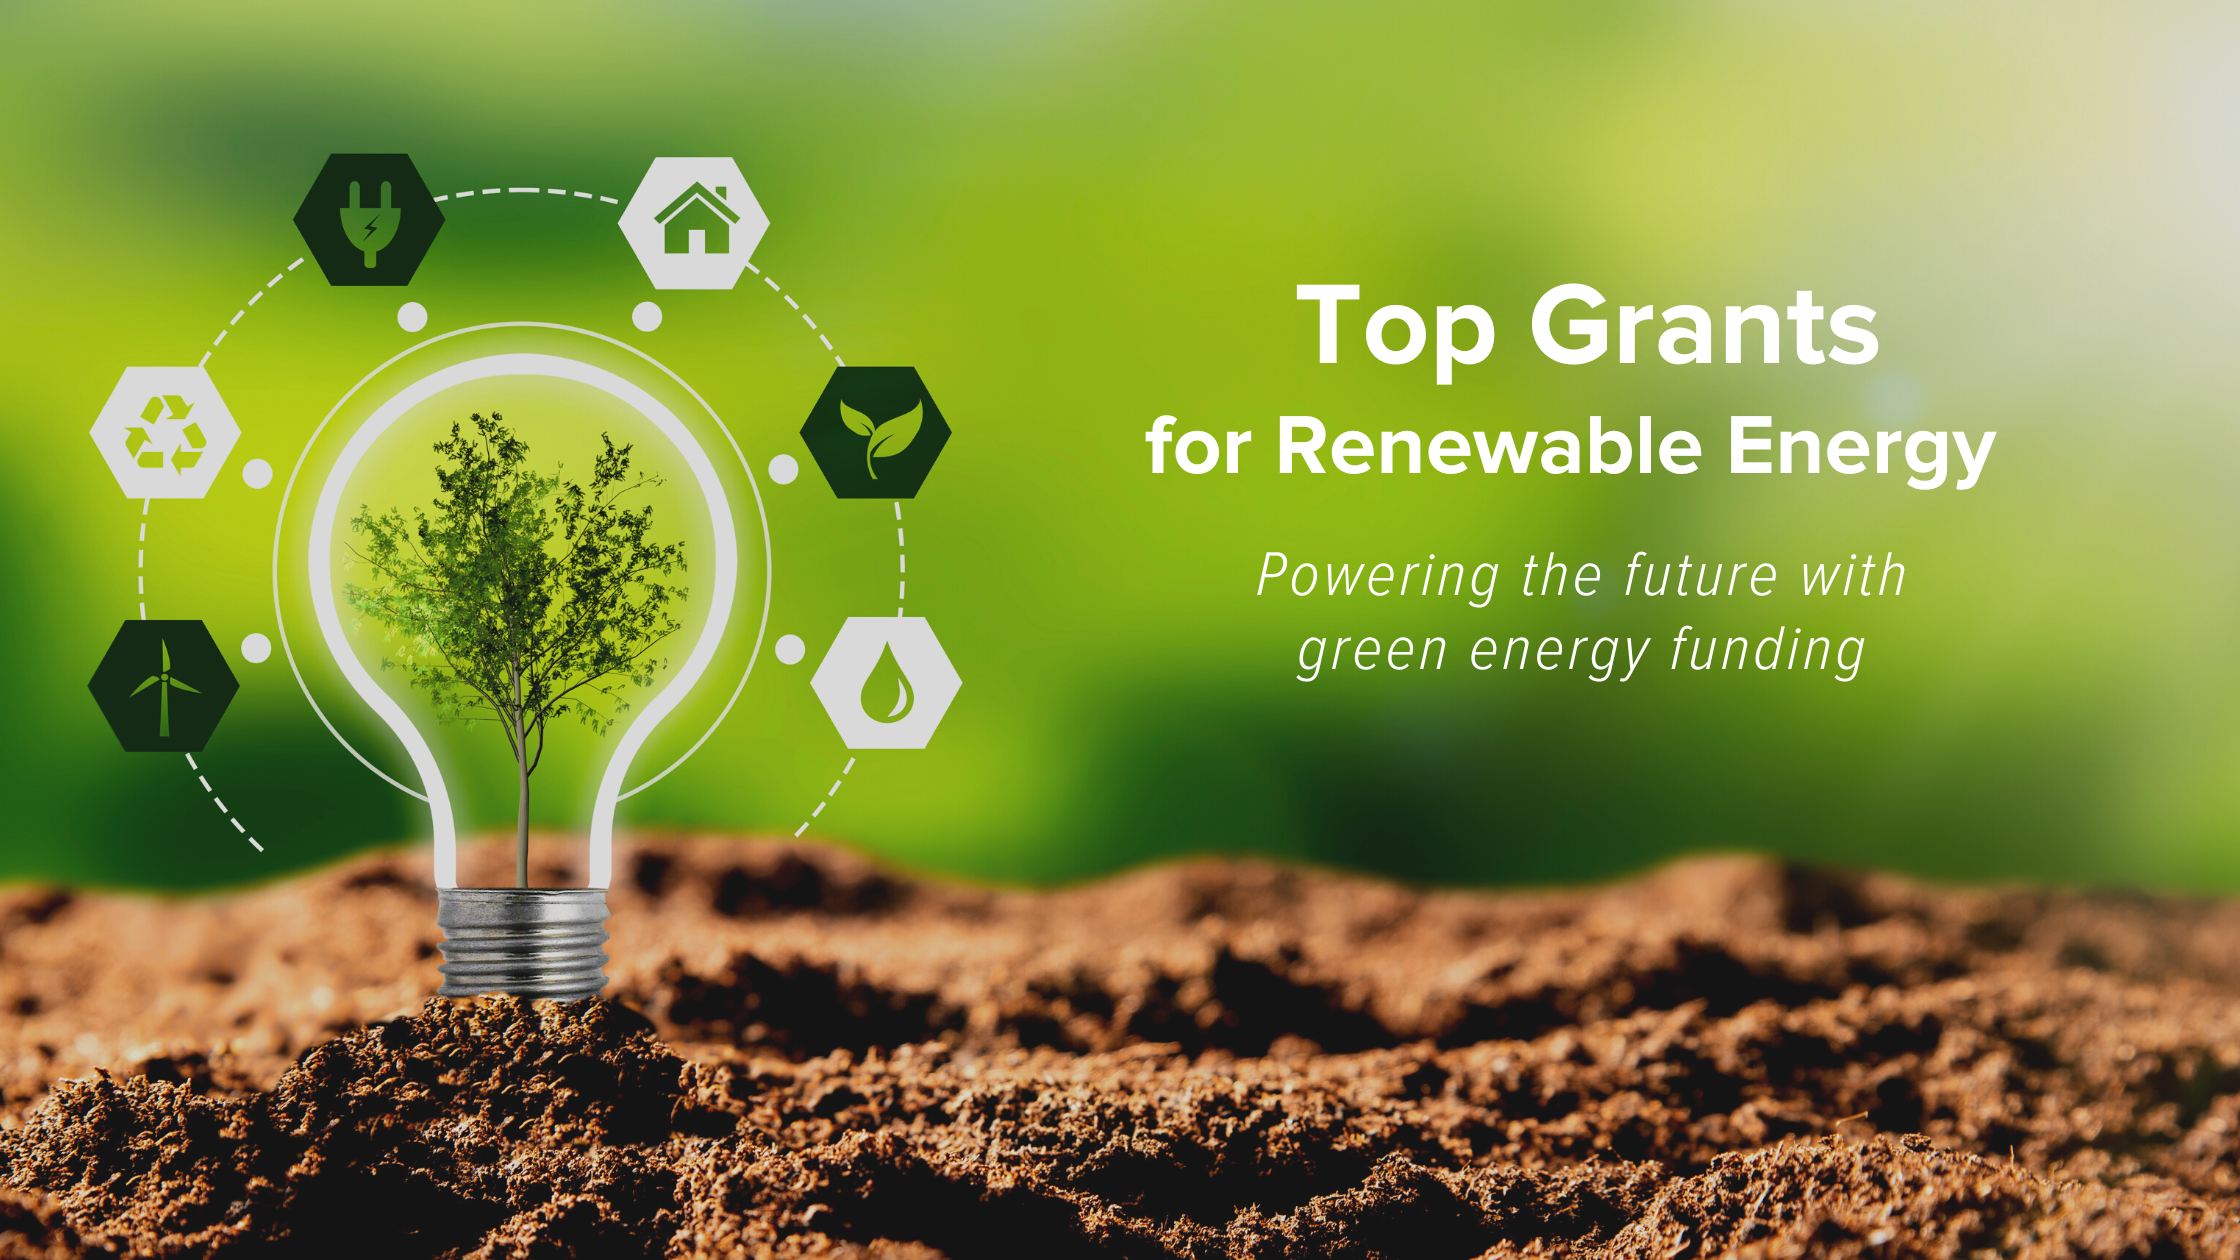 Pocketed Top Grants for Renewable Energy